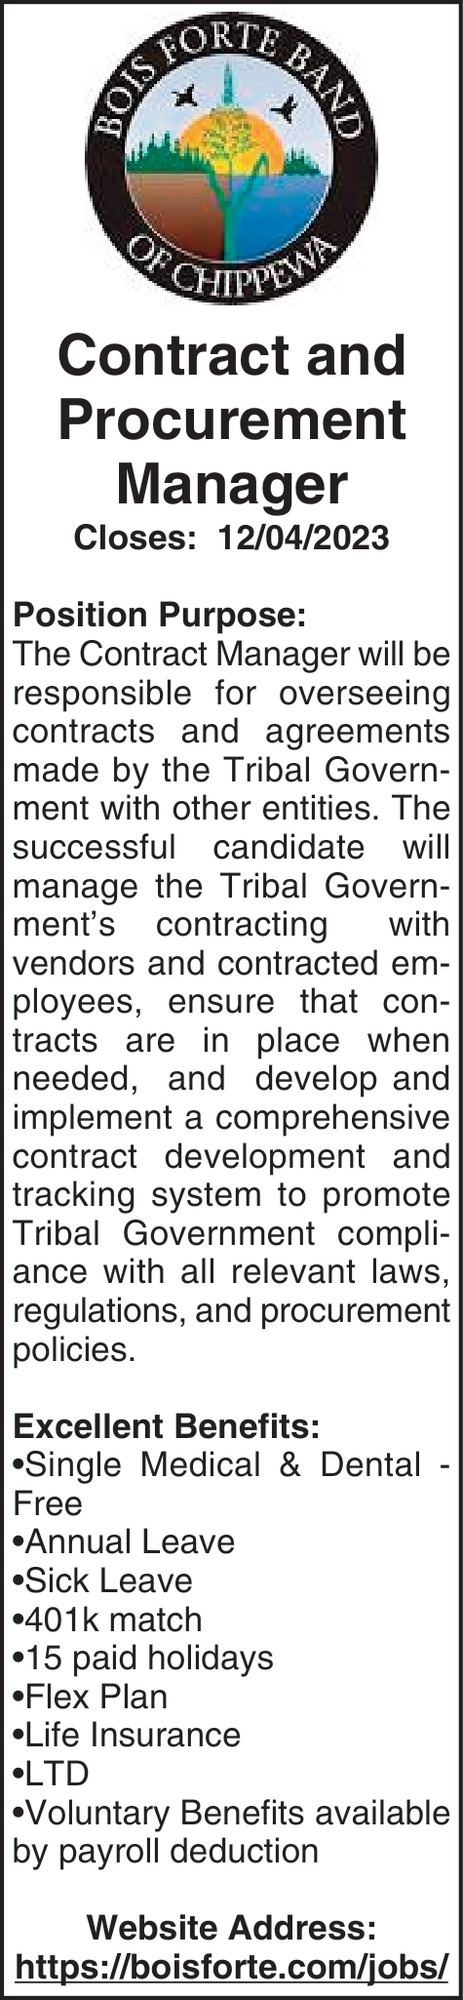 Contract and Procurement Manager